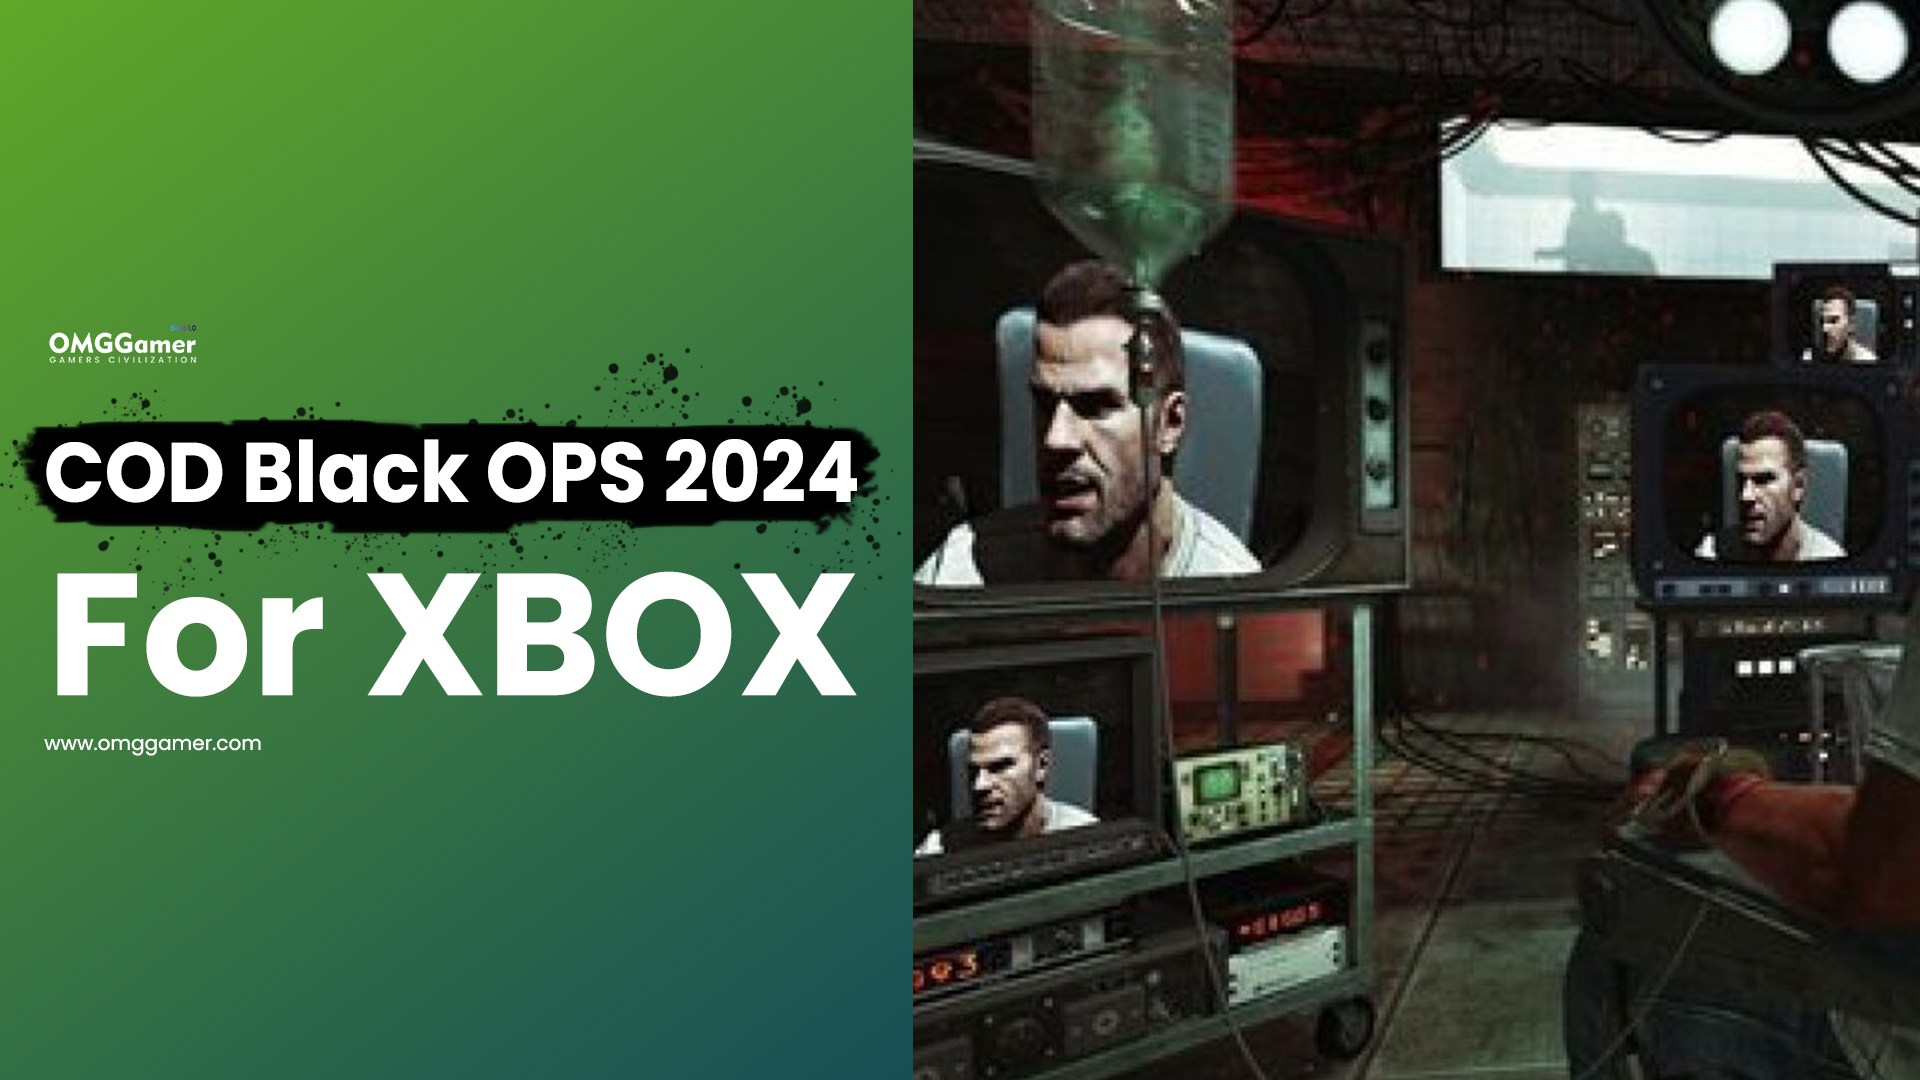 COD Black OPS 2024 for XBOX